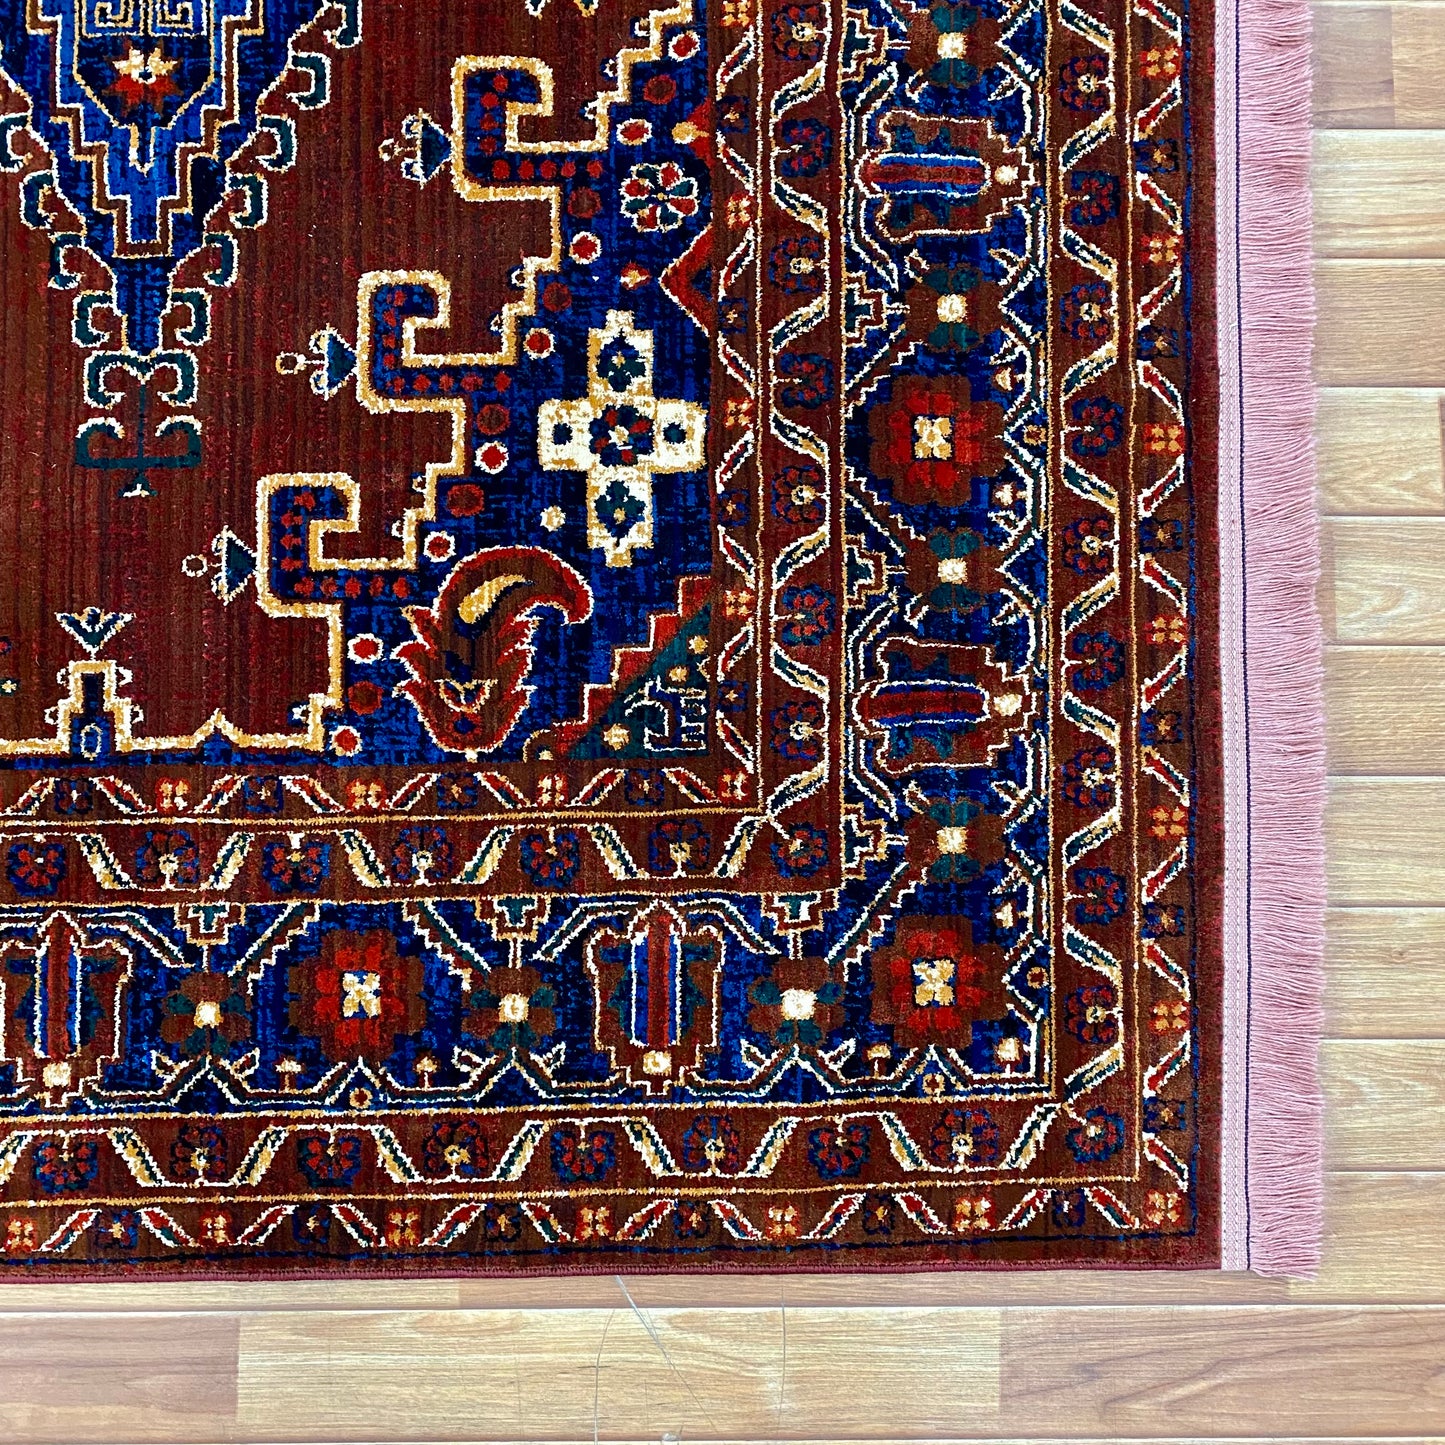 7 ft x 10 ft - Area Rug - Persian Baluchi 2 - Red Wine and Blue - Timeless Beauty for Your Home